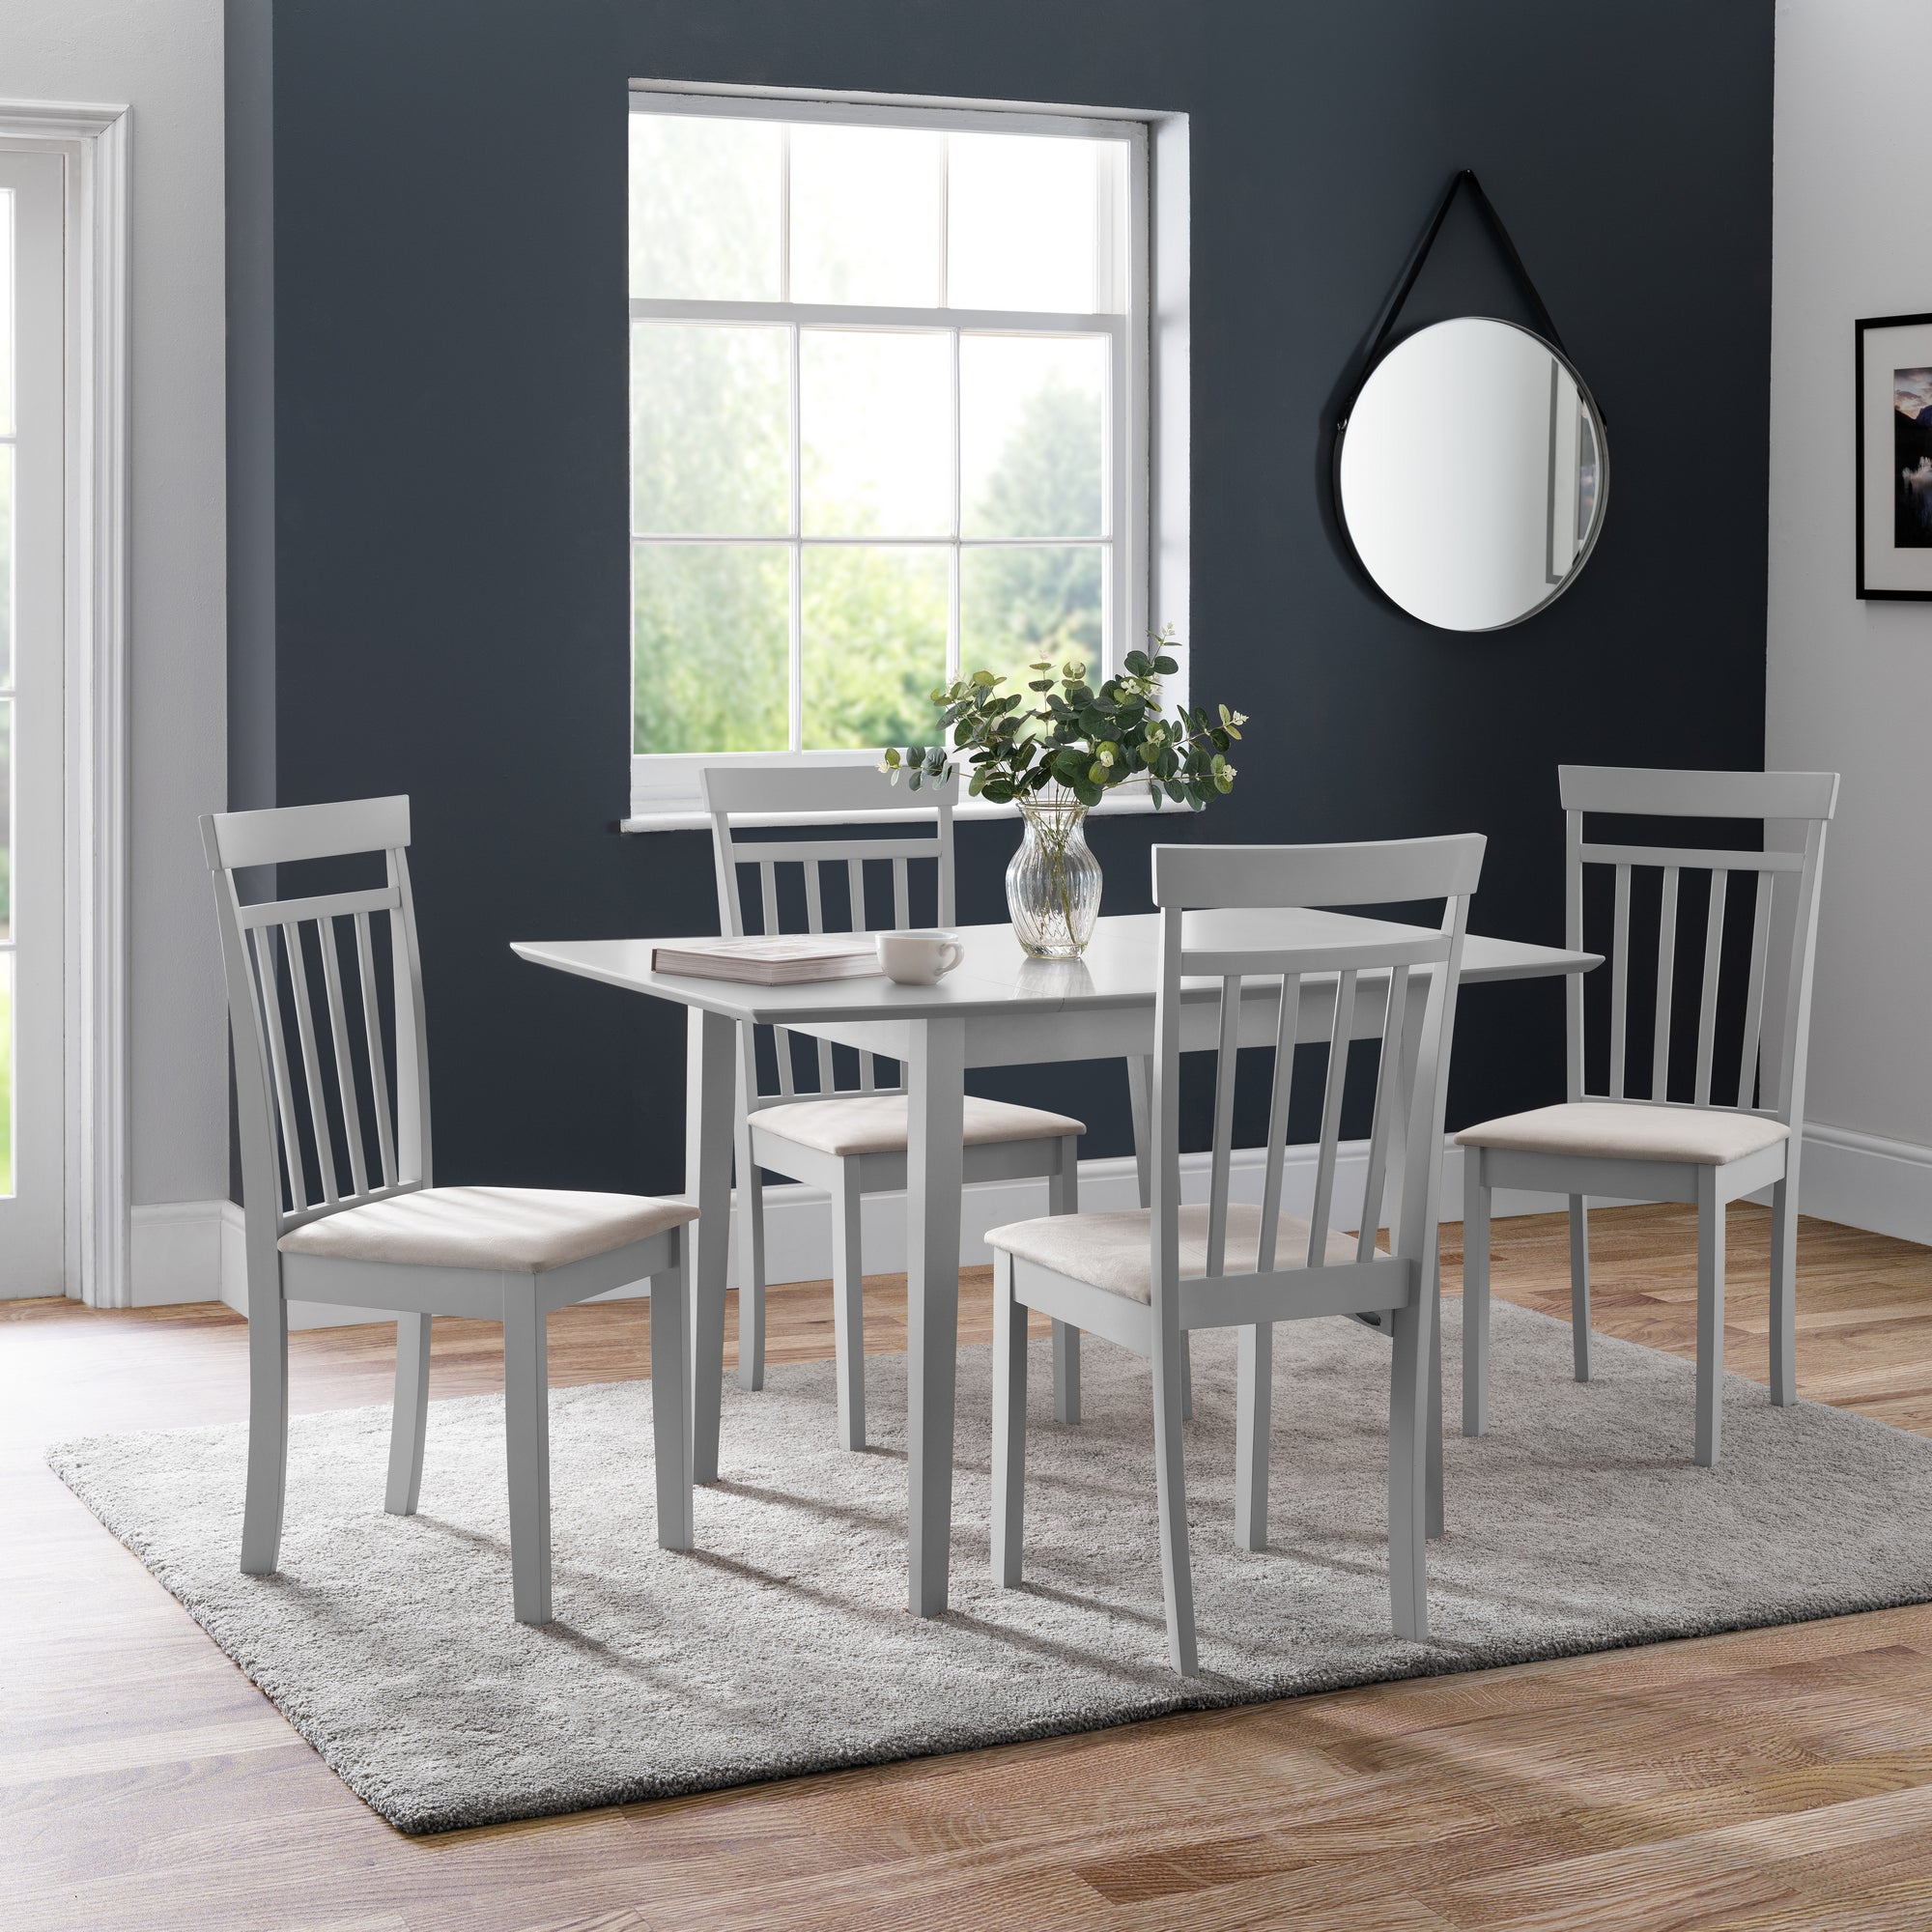 Rufford 4 6 Seater Square Extendable Dining Table Grey